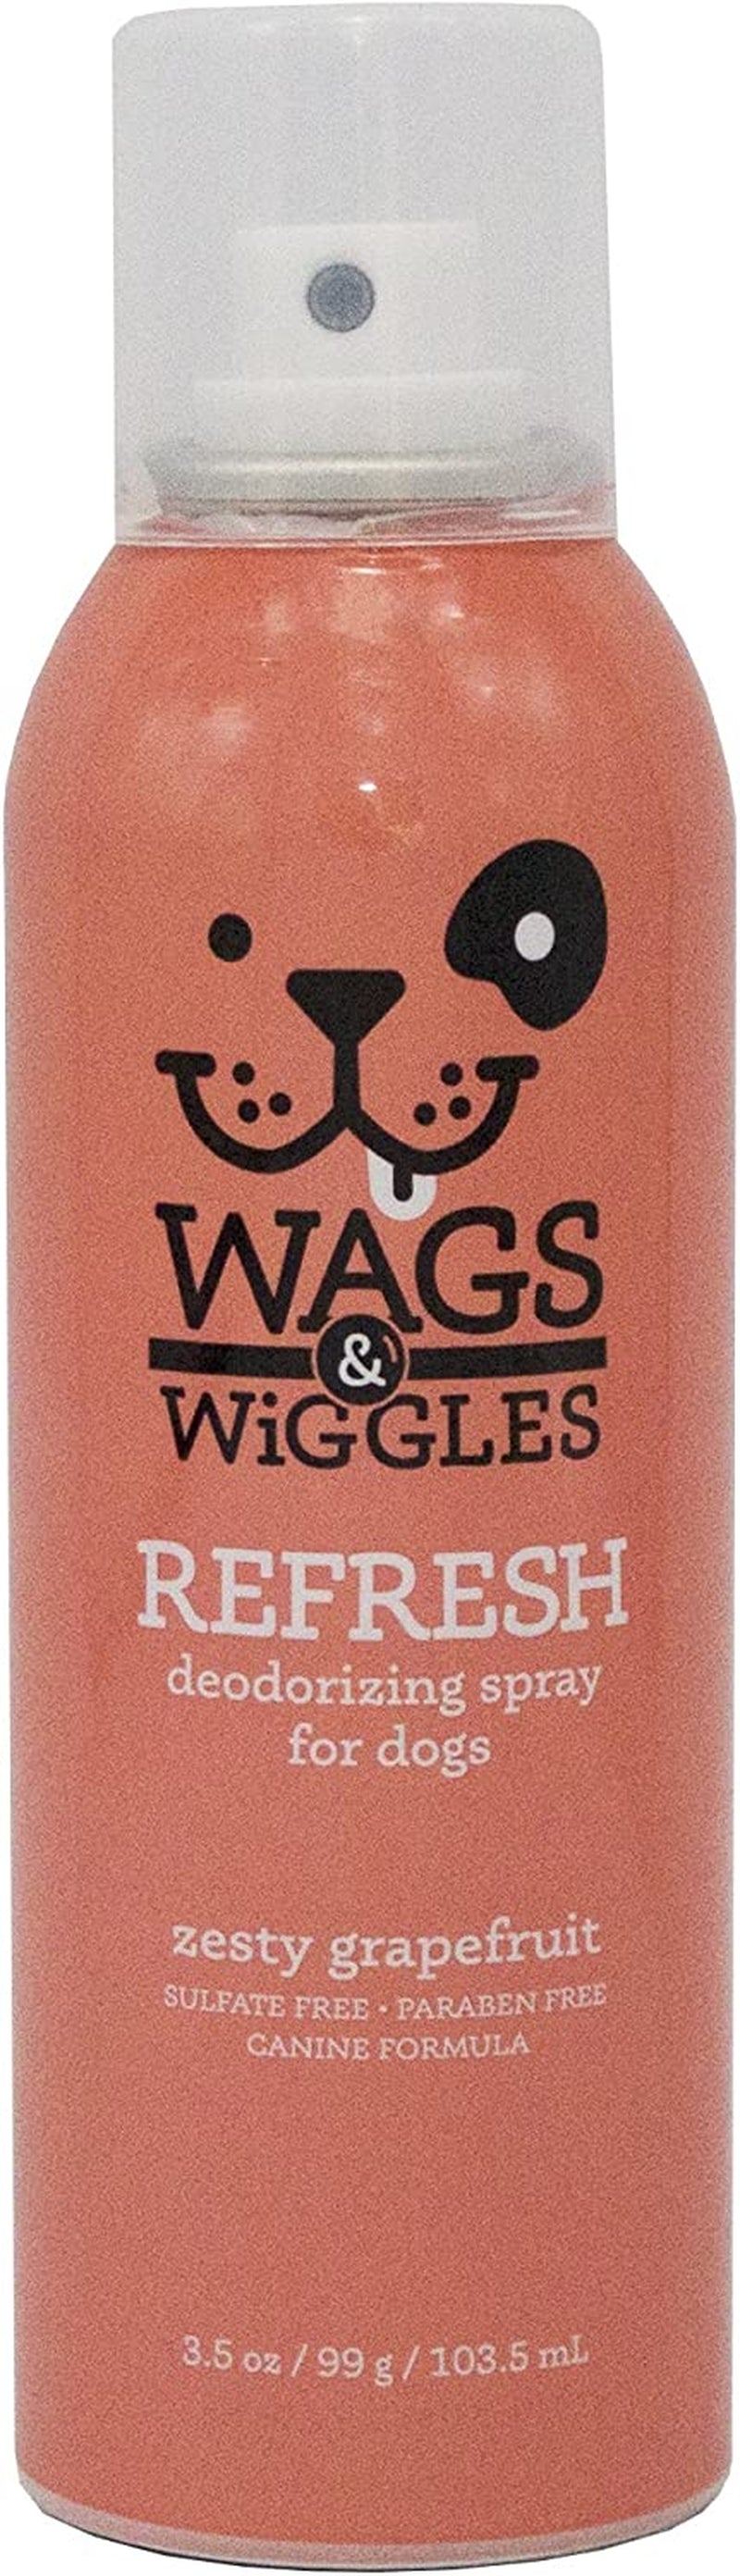 Smooth Detangling Spray in Juicy Apricot | Dog Grooming Detangler Spray to Eliminate Knots, Mats, and Tangles | Dog Freshening Spray, 12 Ounces